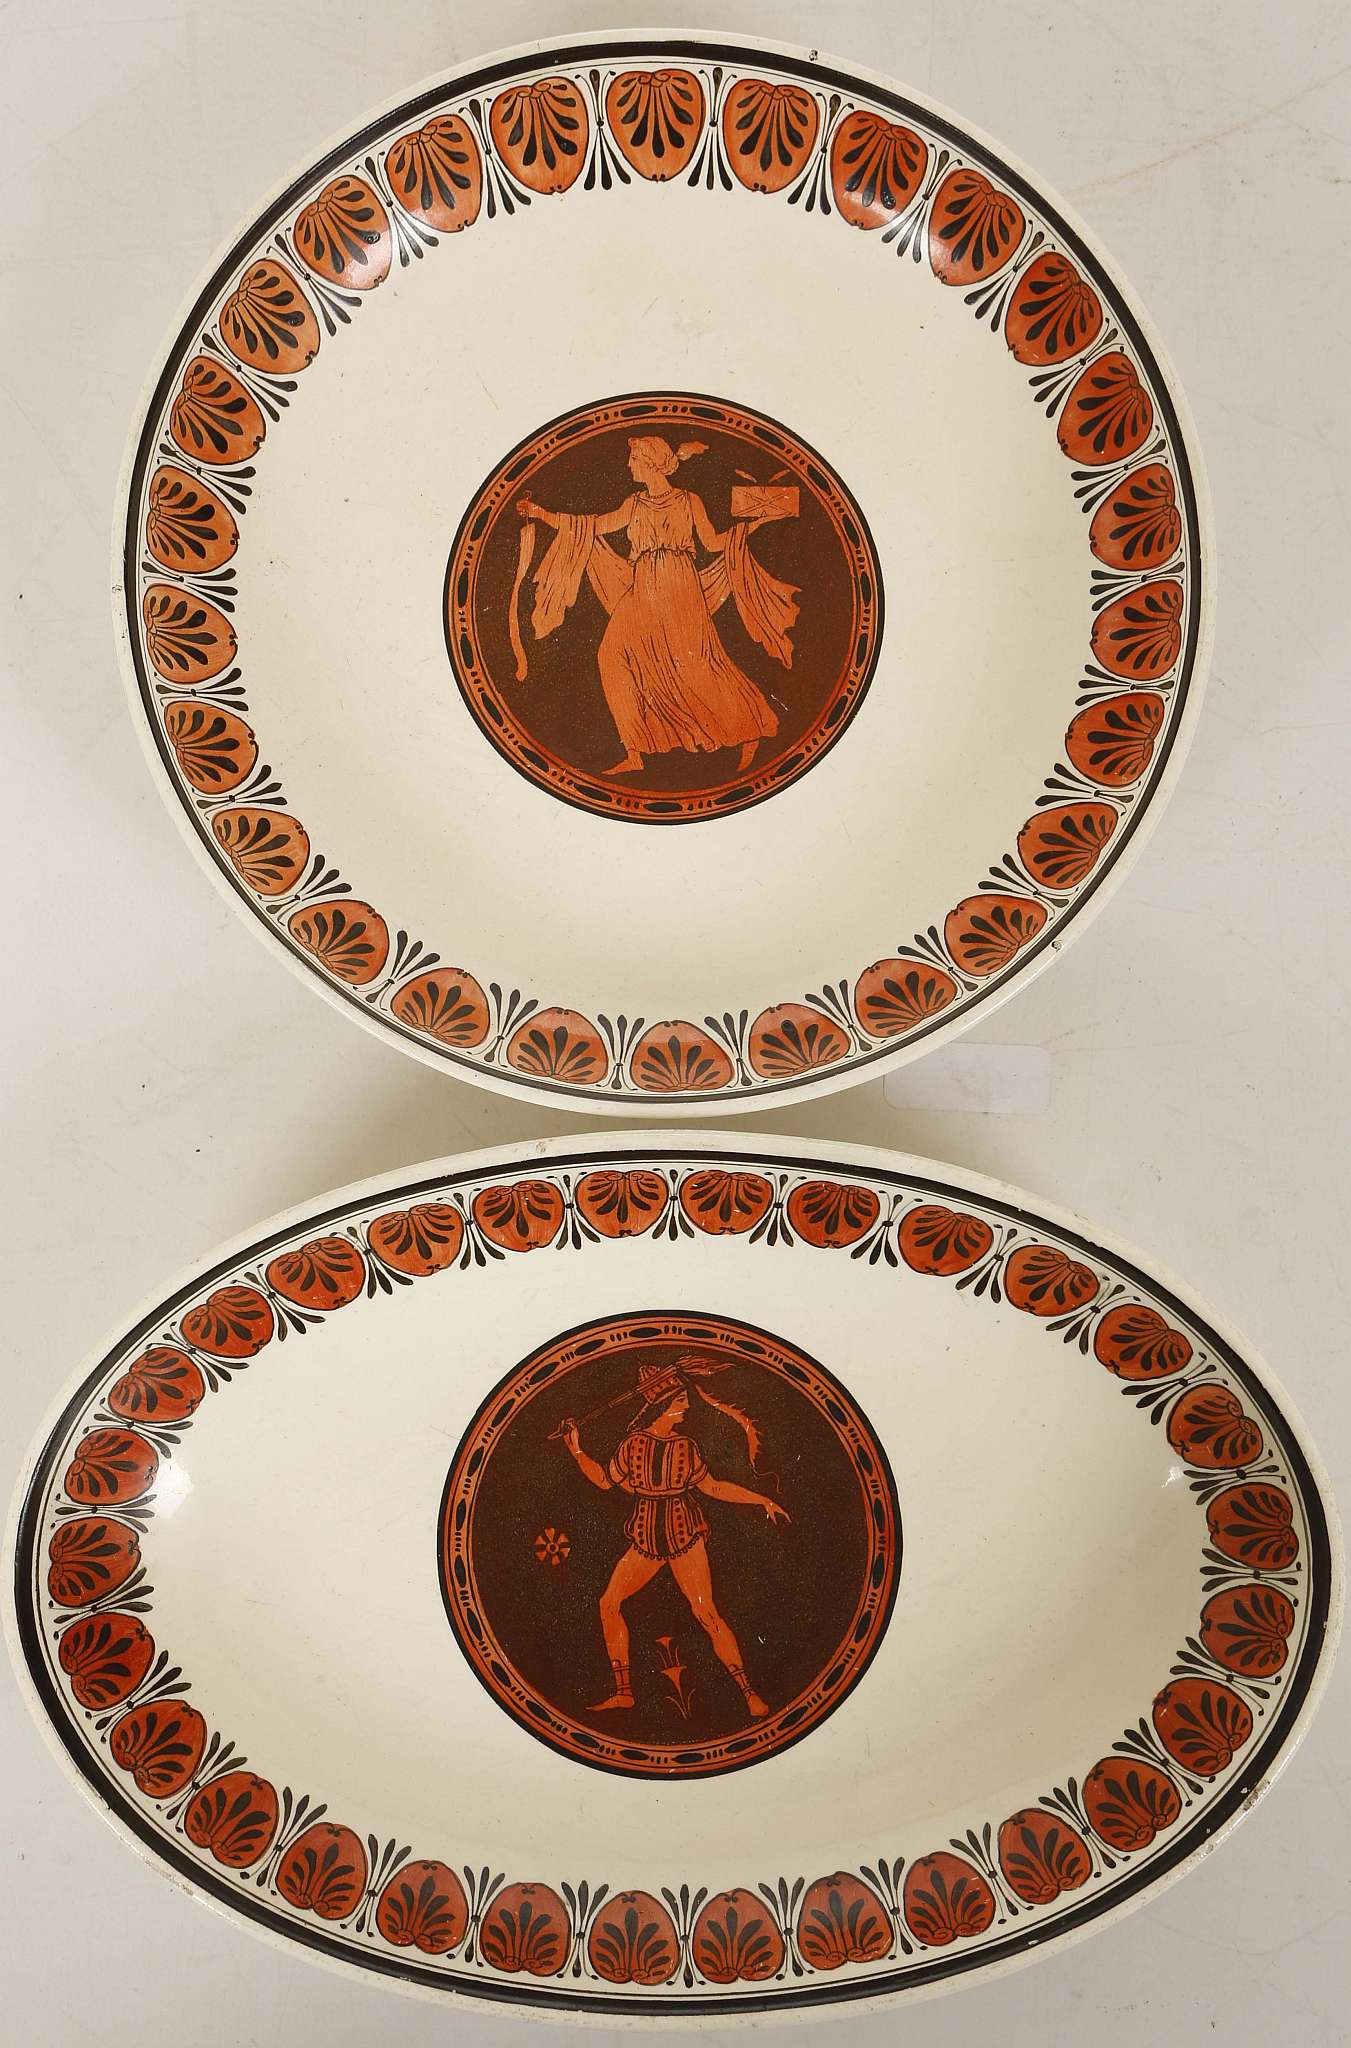 TWO WEDGWOOD 'ETRUSCAN' PATTERN QUEEN'S WARE DISHES, circa 1790, both printed in black and orange